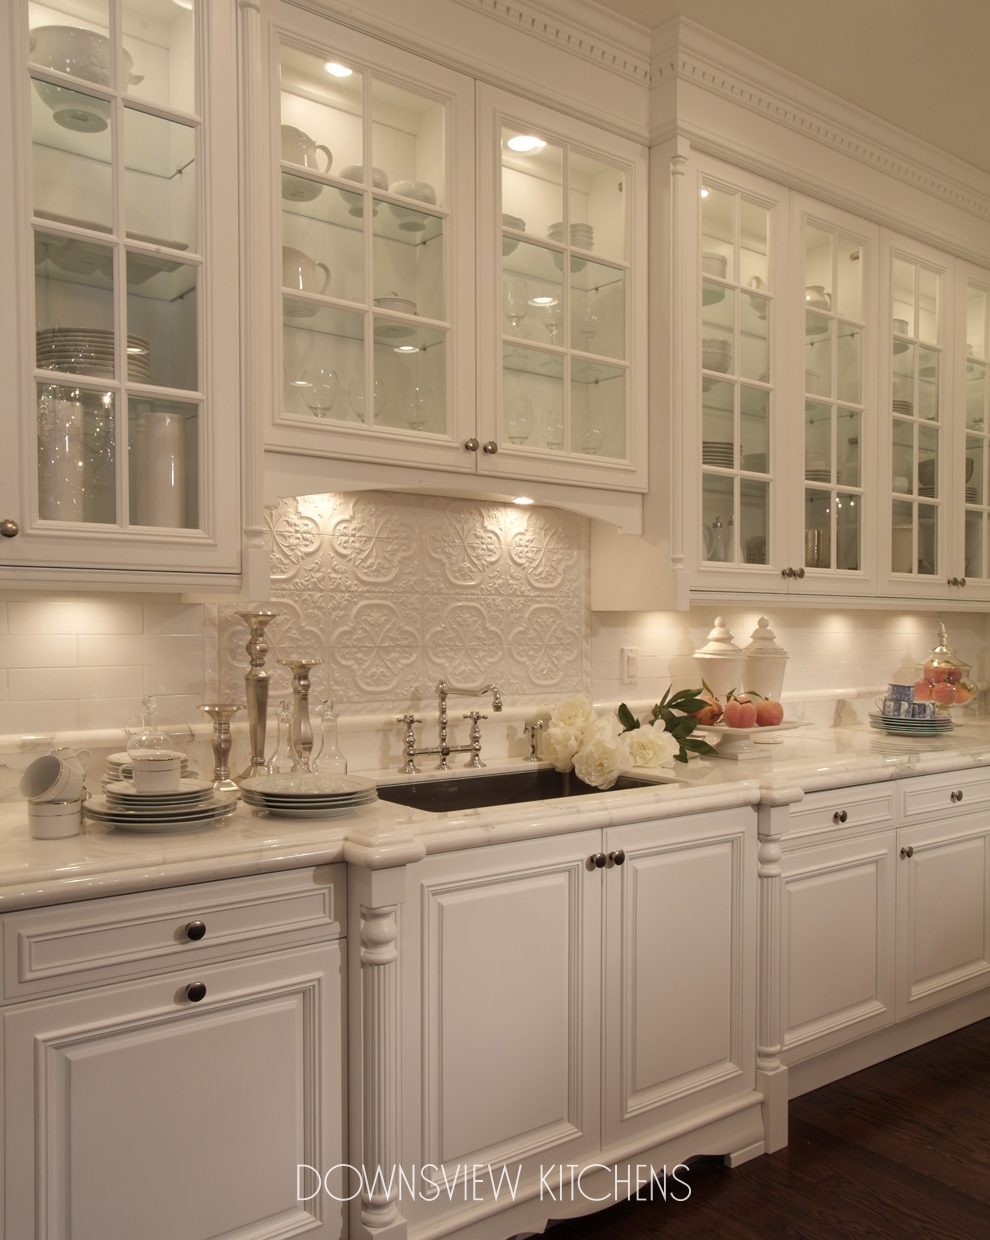 Traditional Beauty Downsview Kitchens